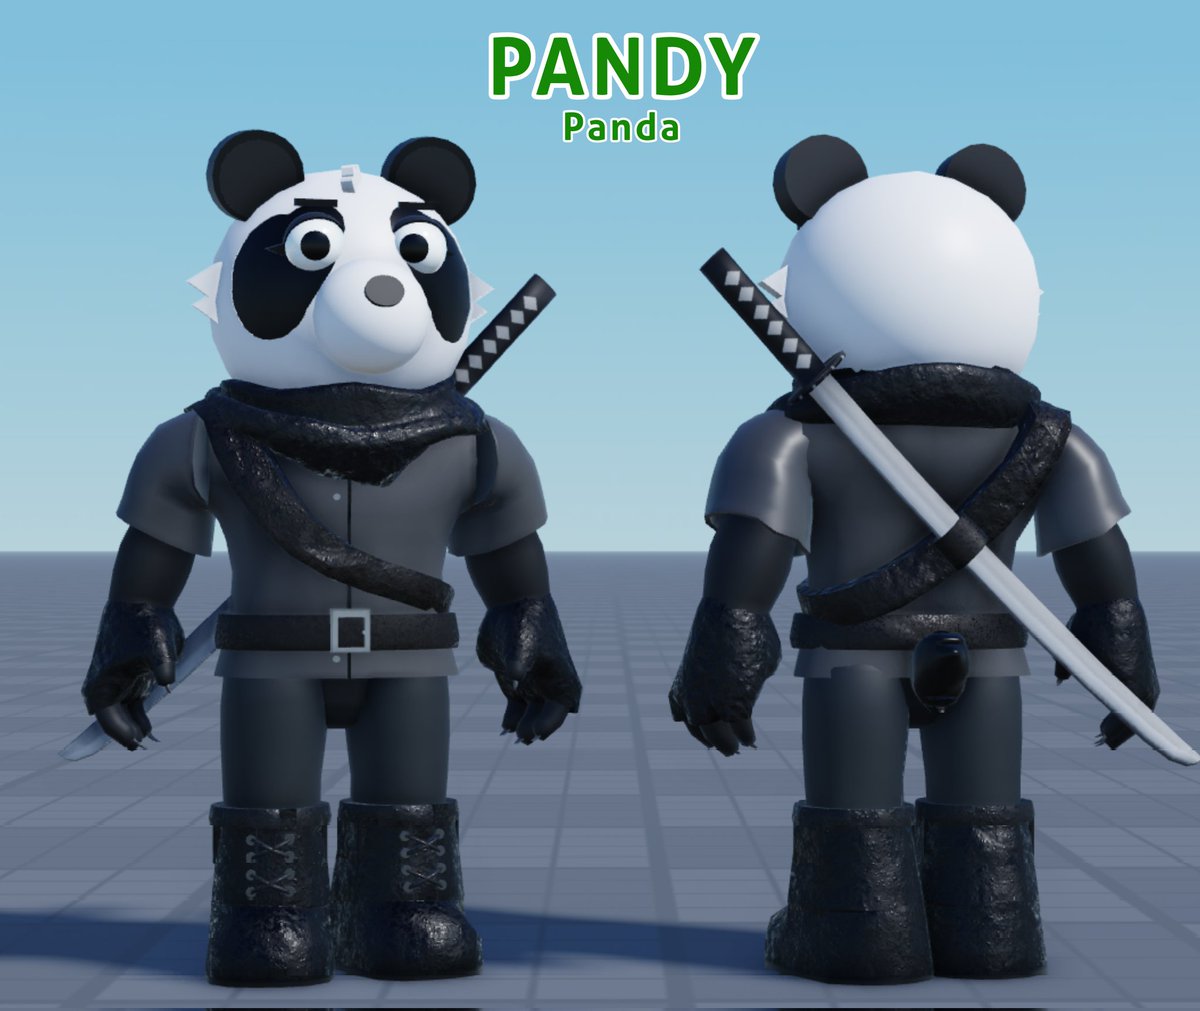 TSP Redesigns part 1!! 
Pandy, Katie and Kitty

Any interaction appreciated
#piggy #piggyroblox #robloxpiggy